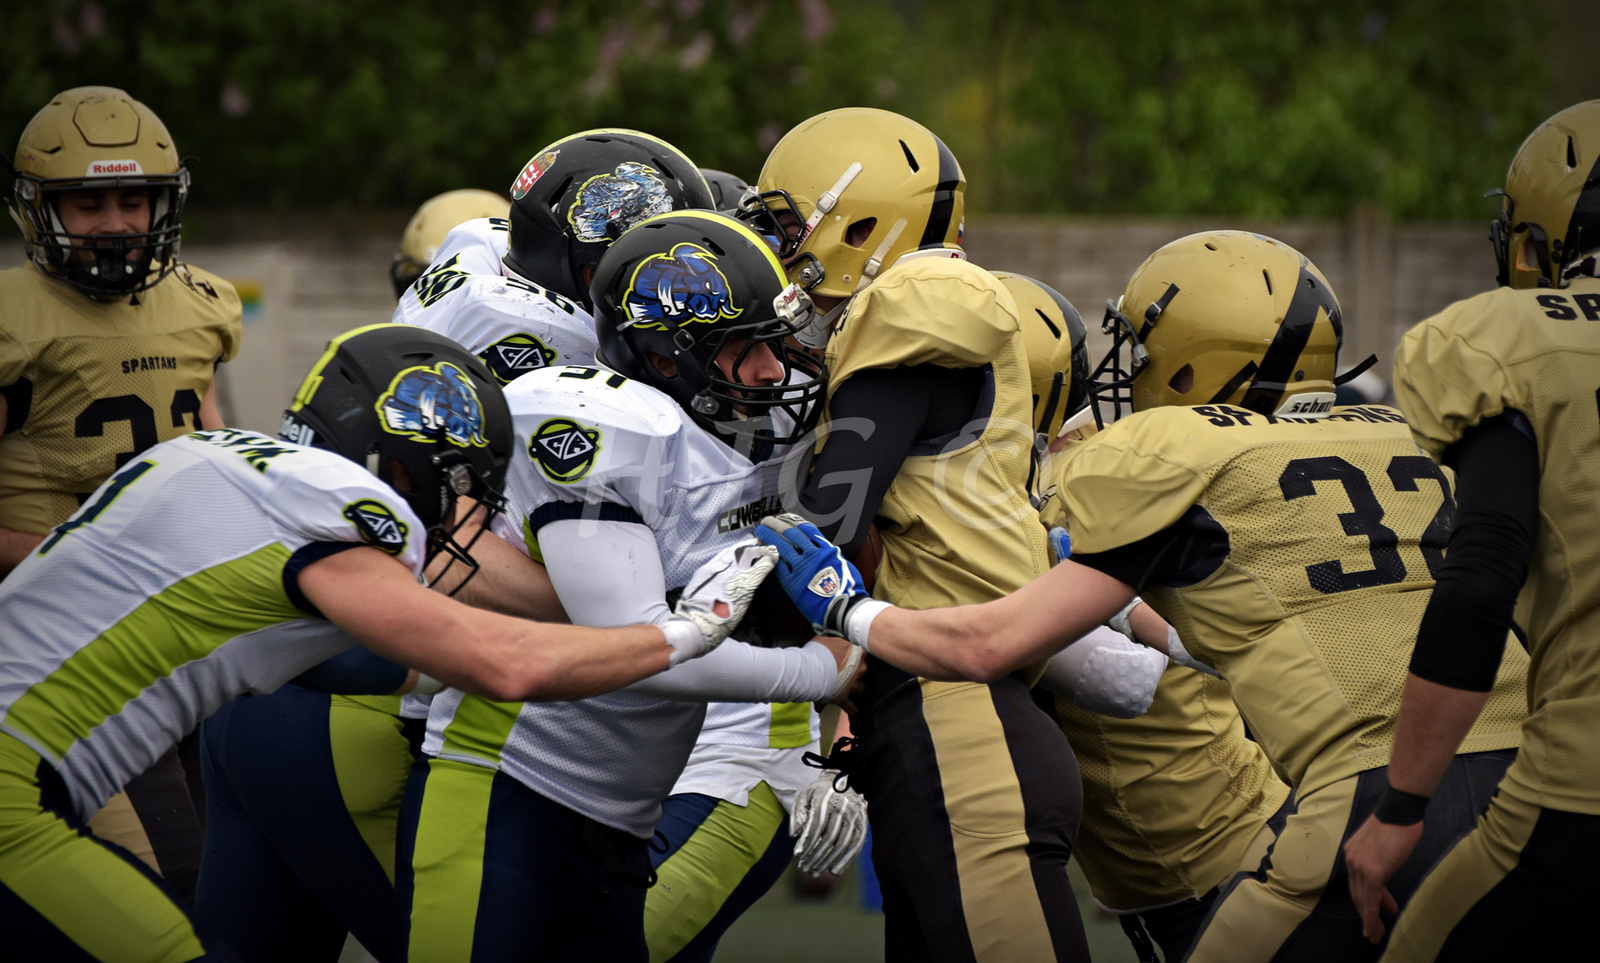 Budapest Cowbells vs Moscow Spartans